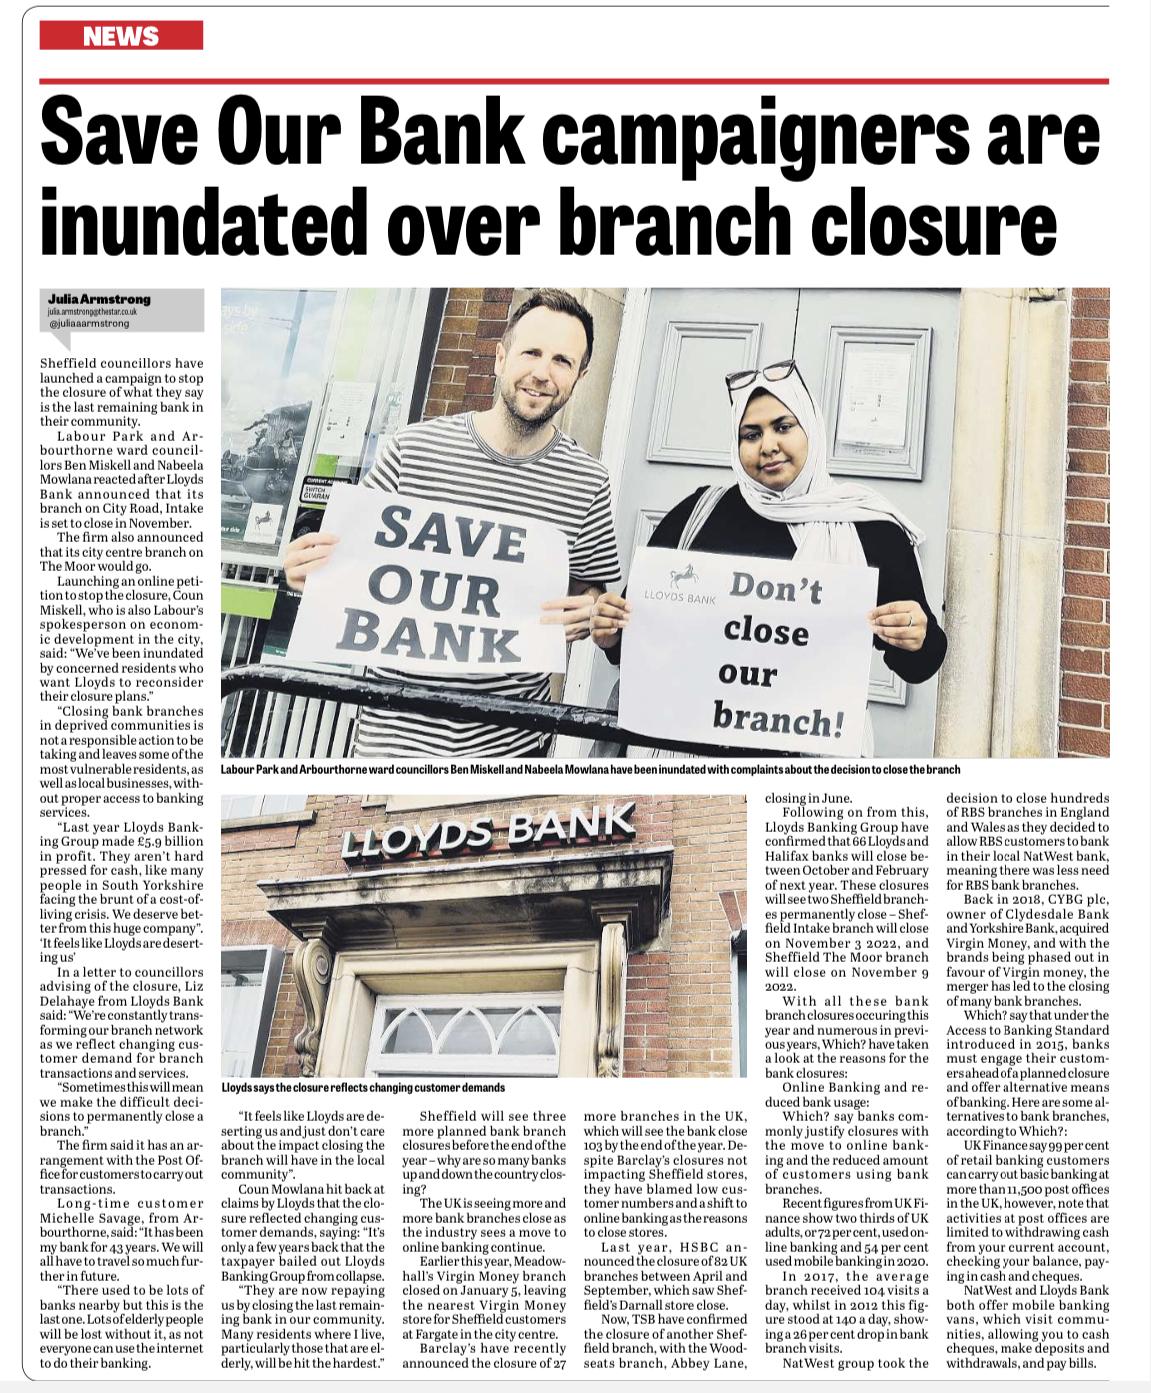 The Star’s coverage of the campaign to save the last remaining branch in the community